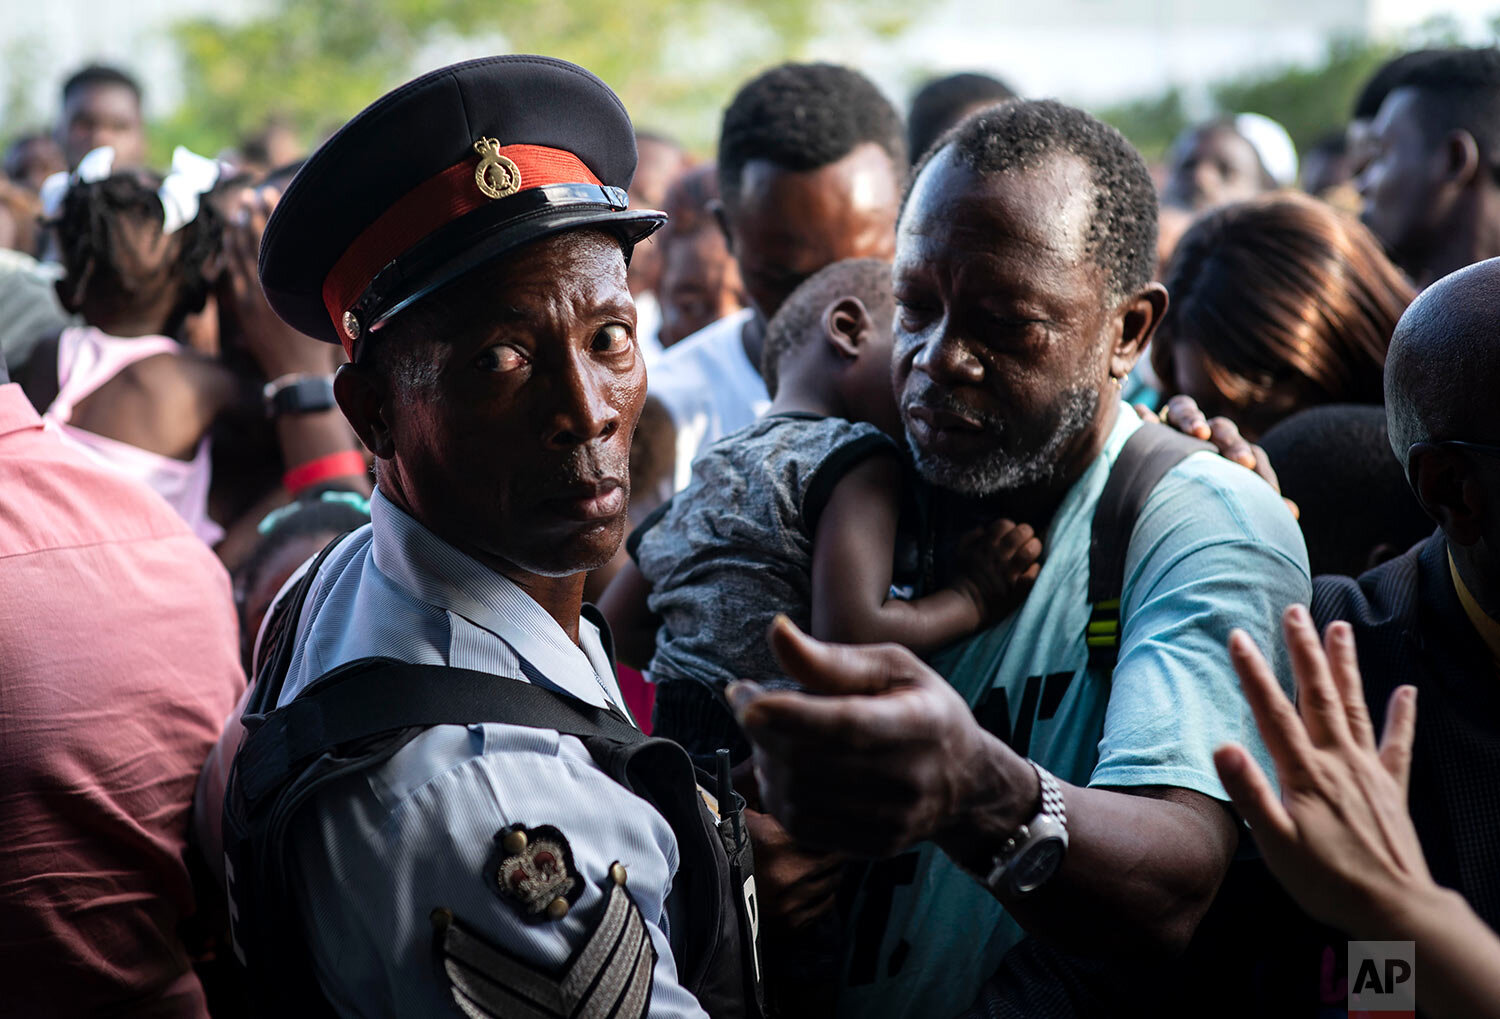  Haitian immigrants displaced from the island of Abaco because of Hurricane Dorian wait to get food from humanitarian organizations in Nassau, Bahamas, Sunday, Sept. 29, 2019.  (AP Photo / Ramon Espinosa) 